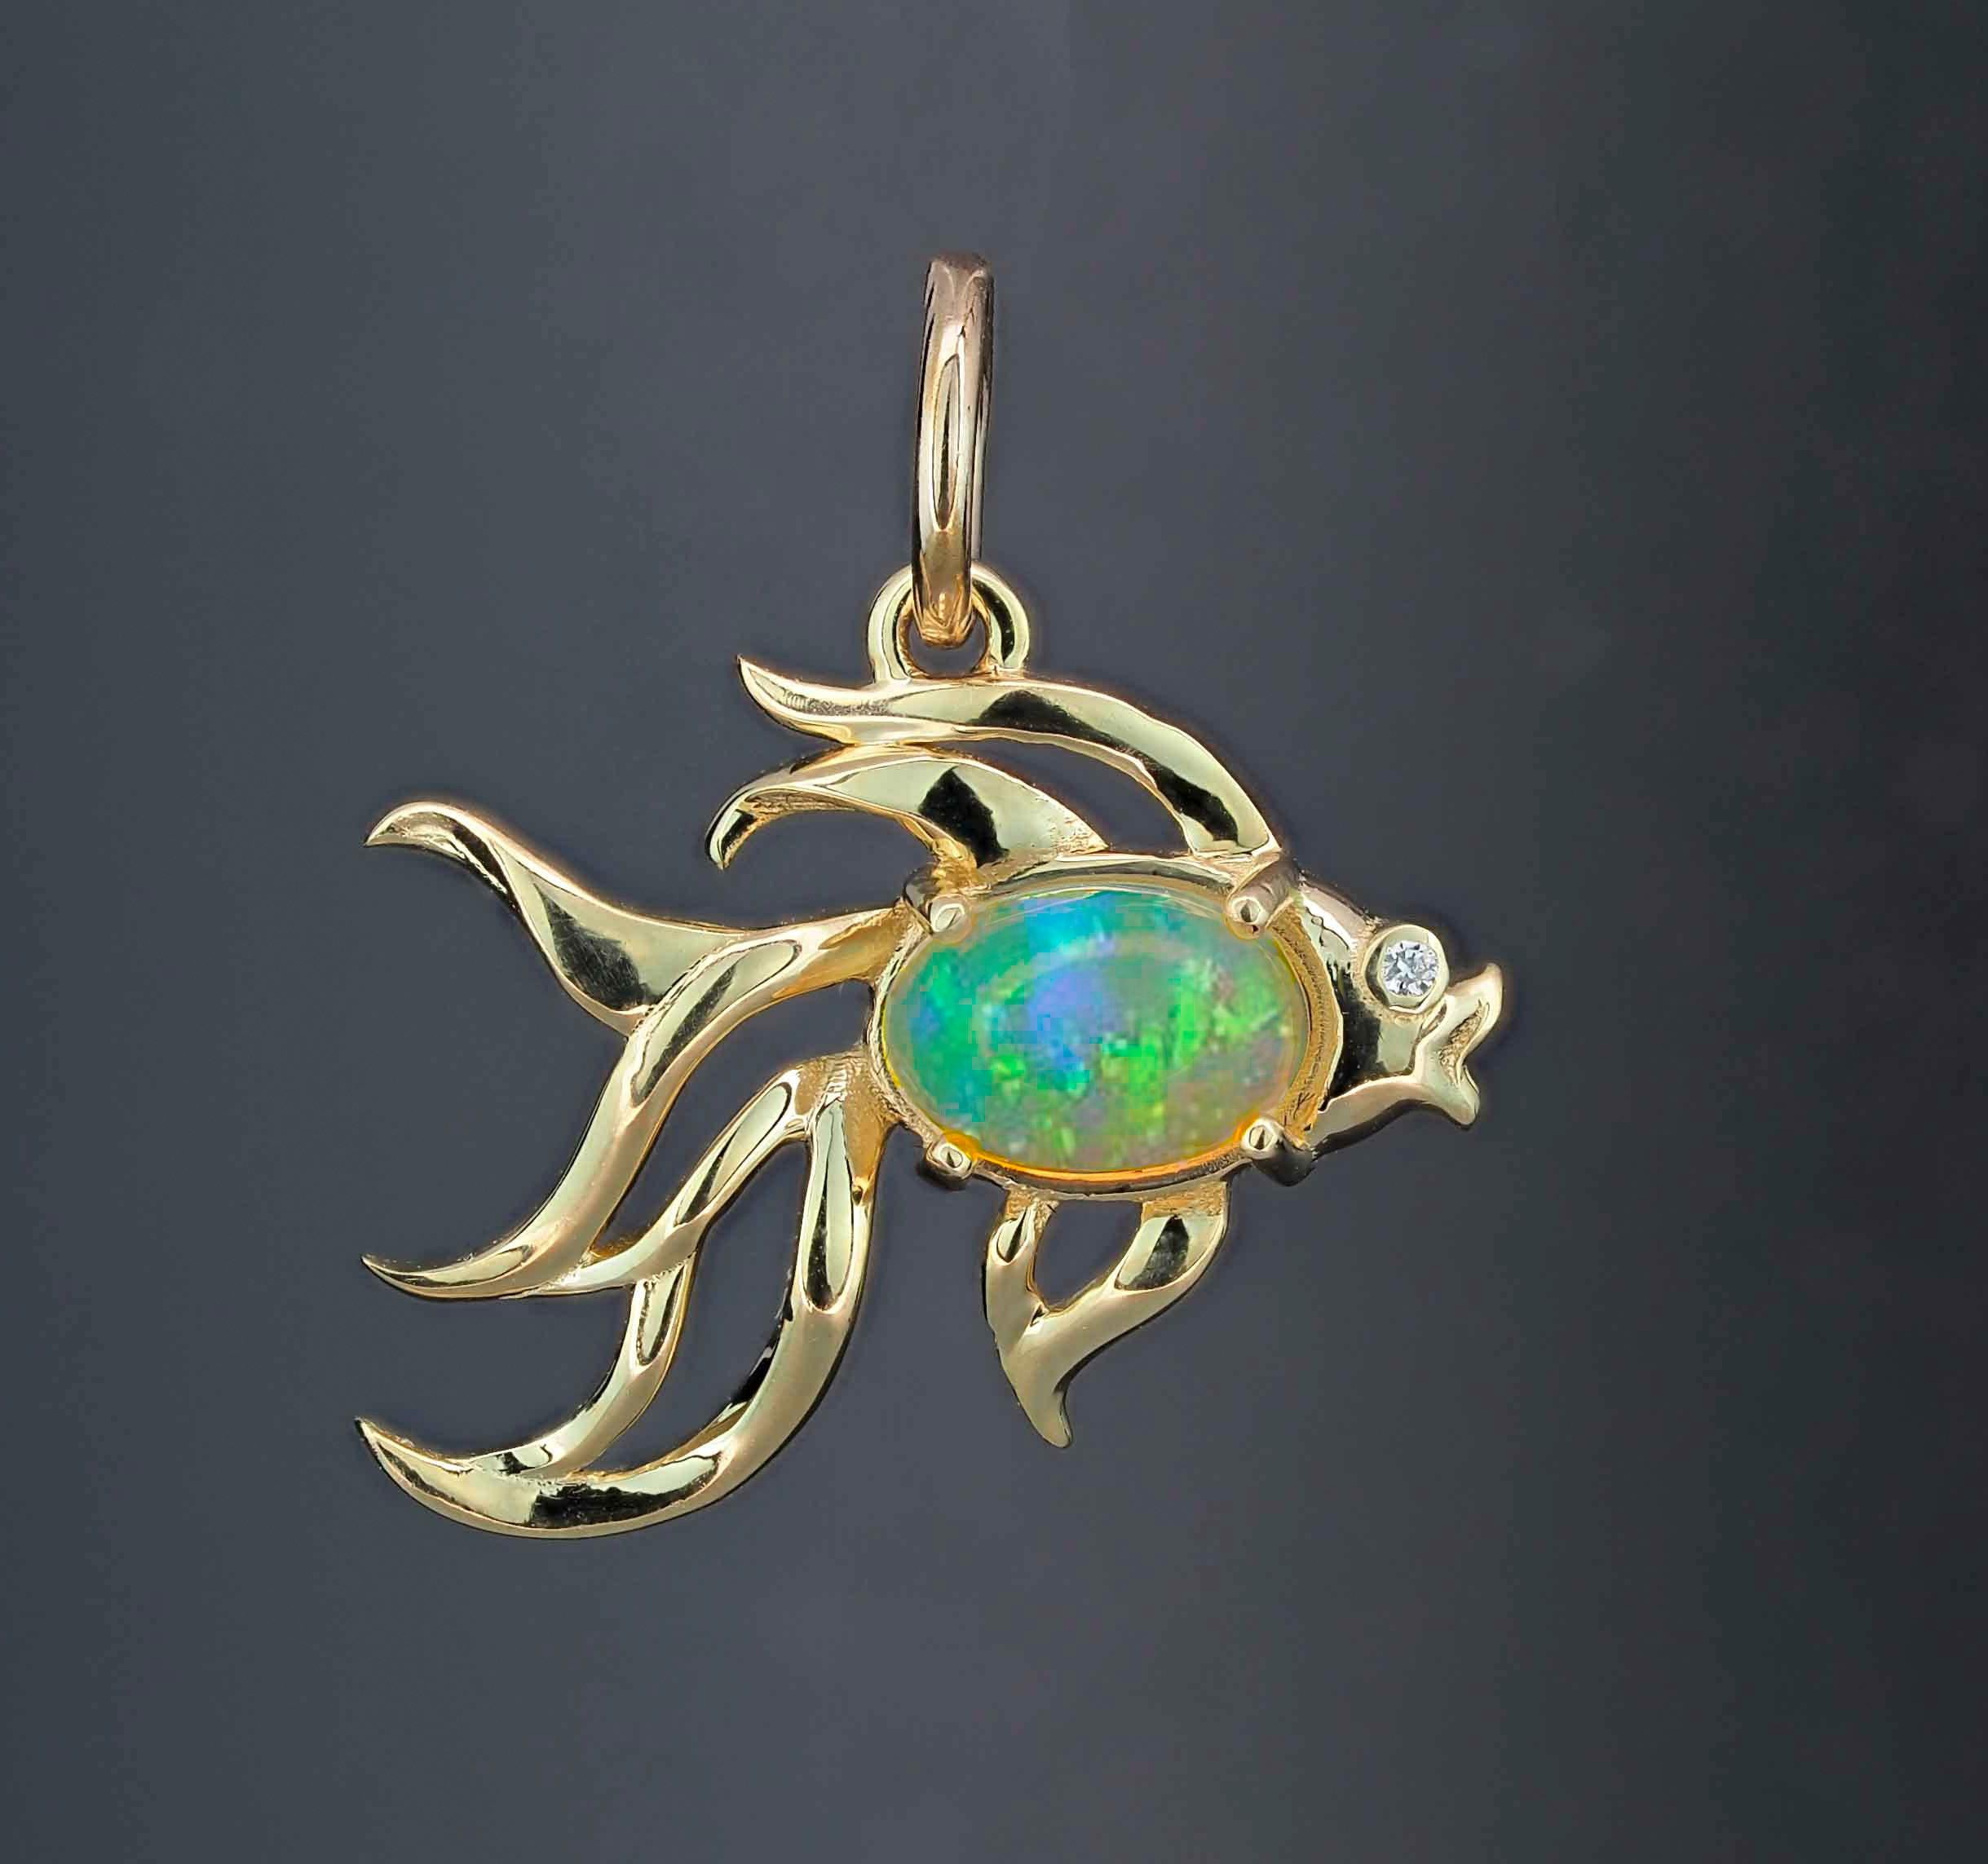 Oval Cut Opal Fish pendant in 14k gold.  For Sale